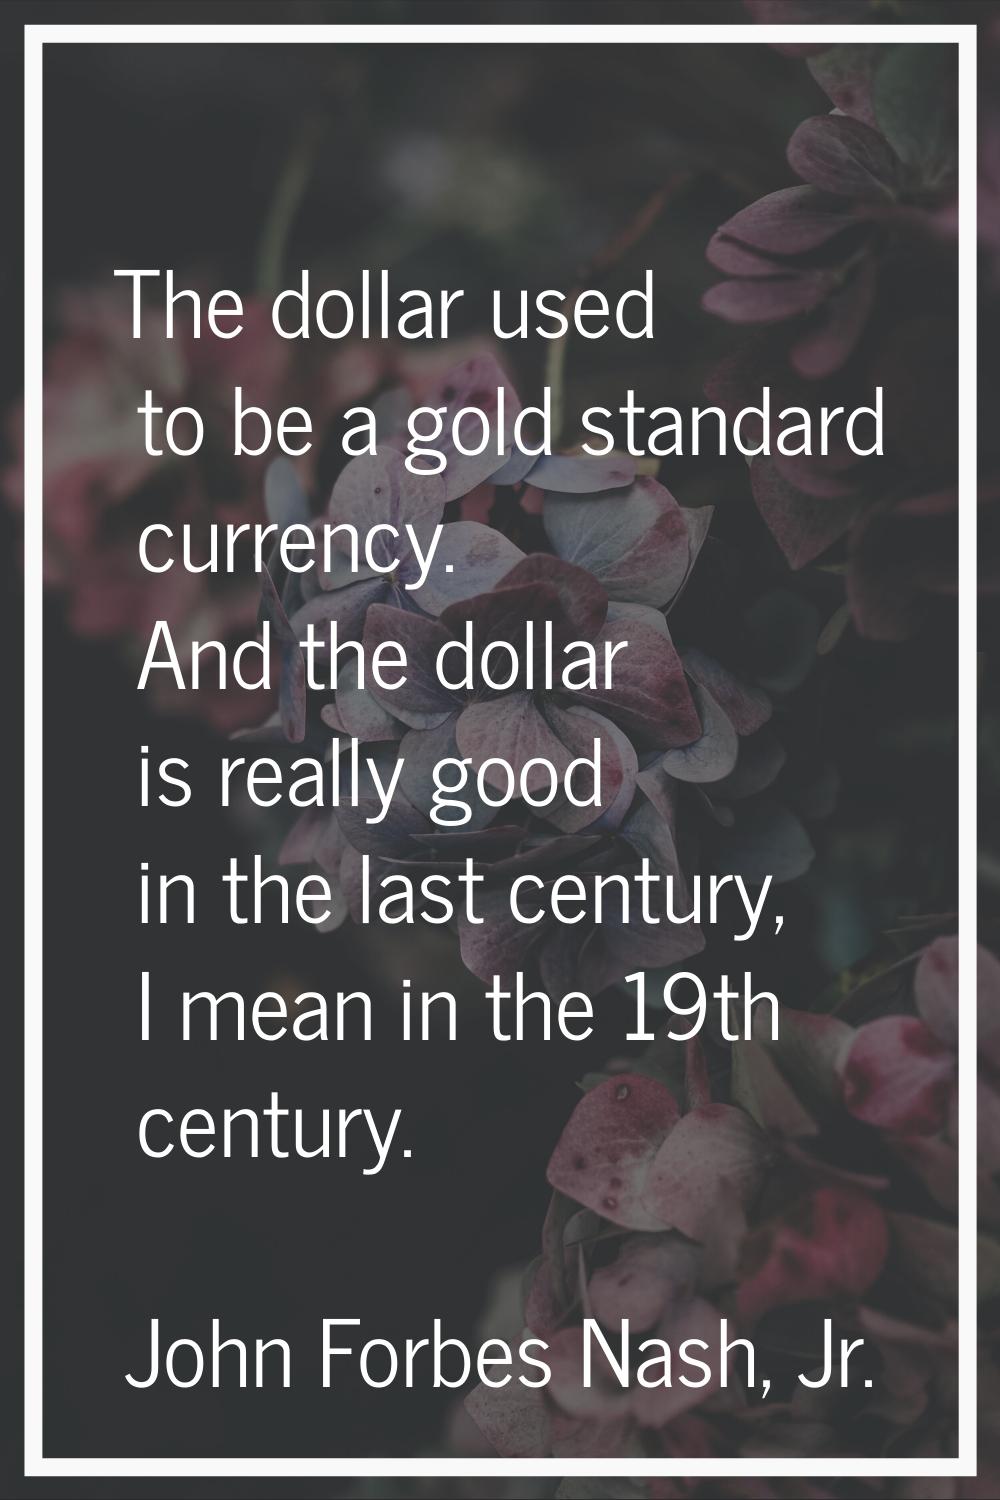 The dollar used to be a gold standard currency. And the dollar is really good in the last century, 